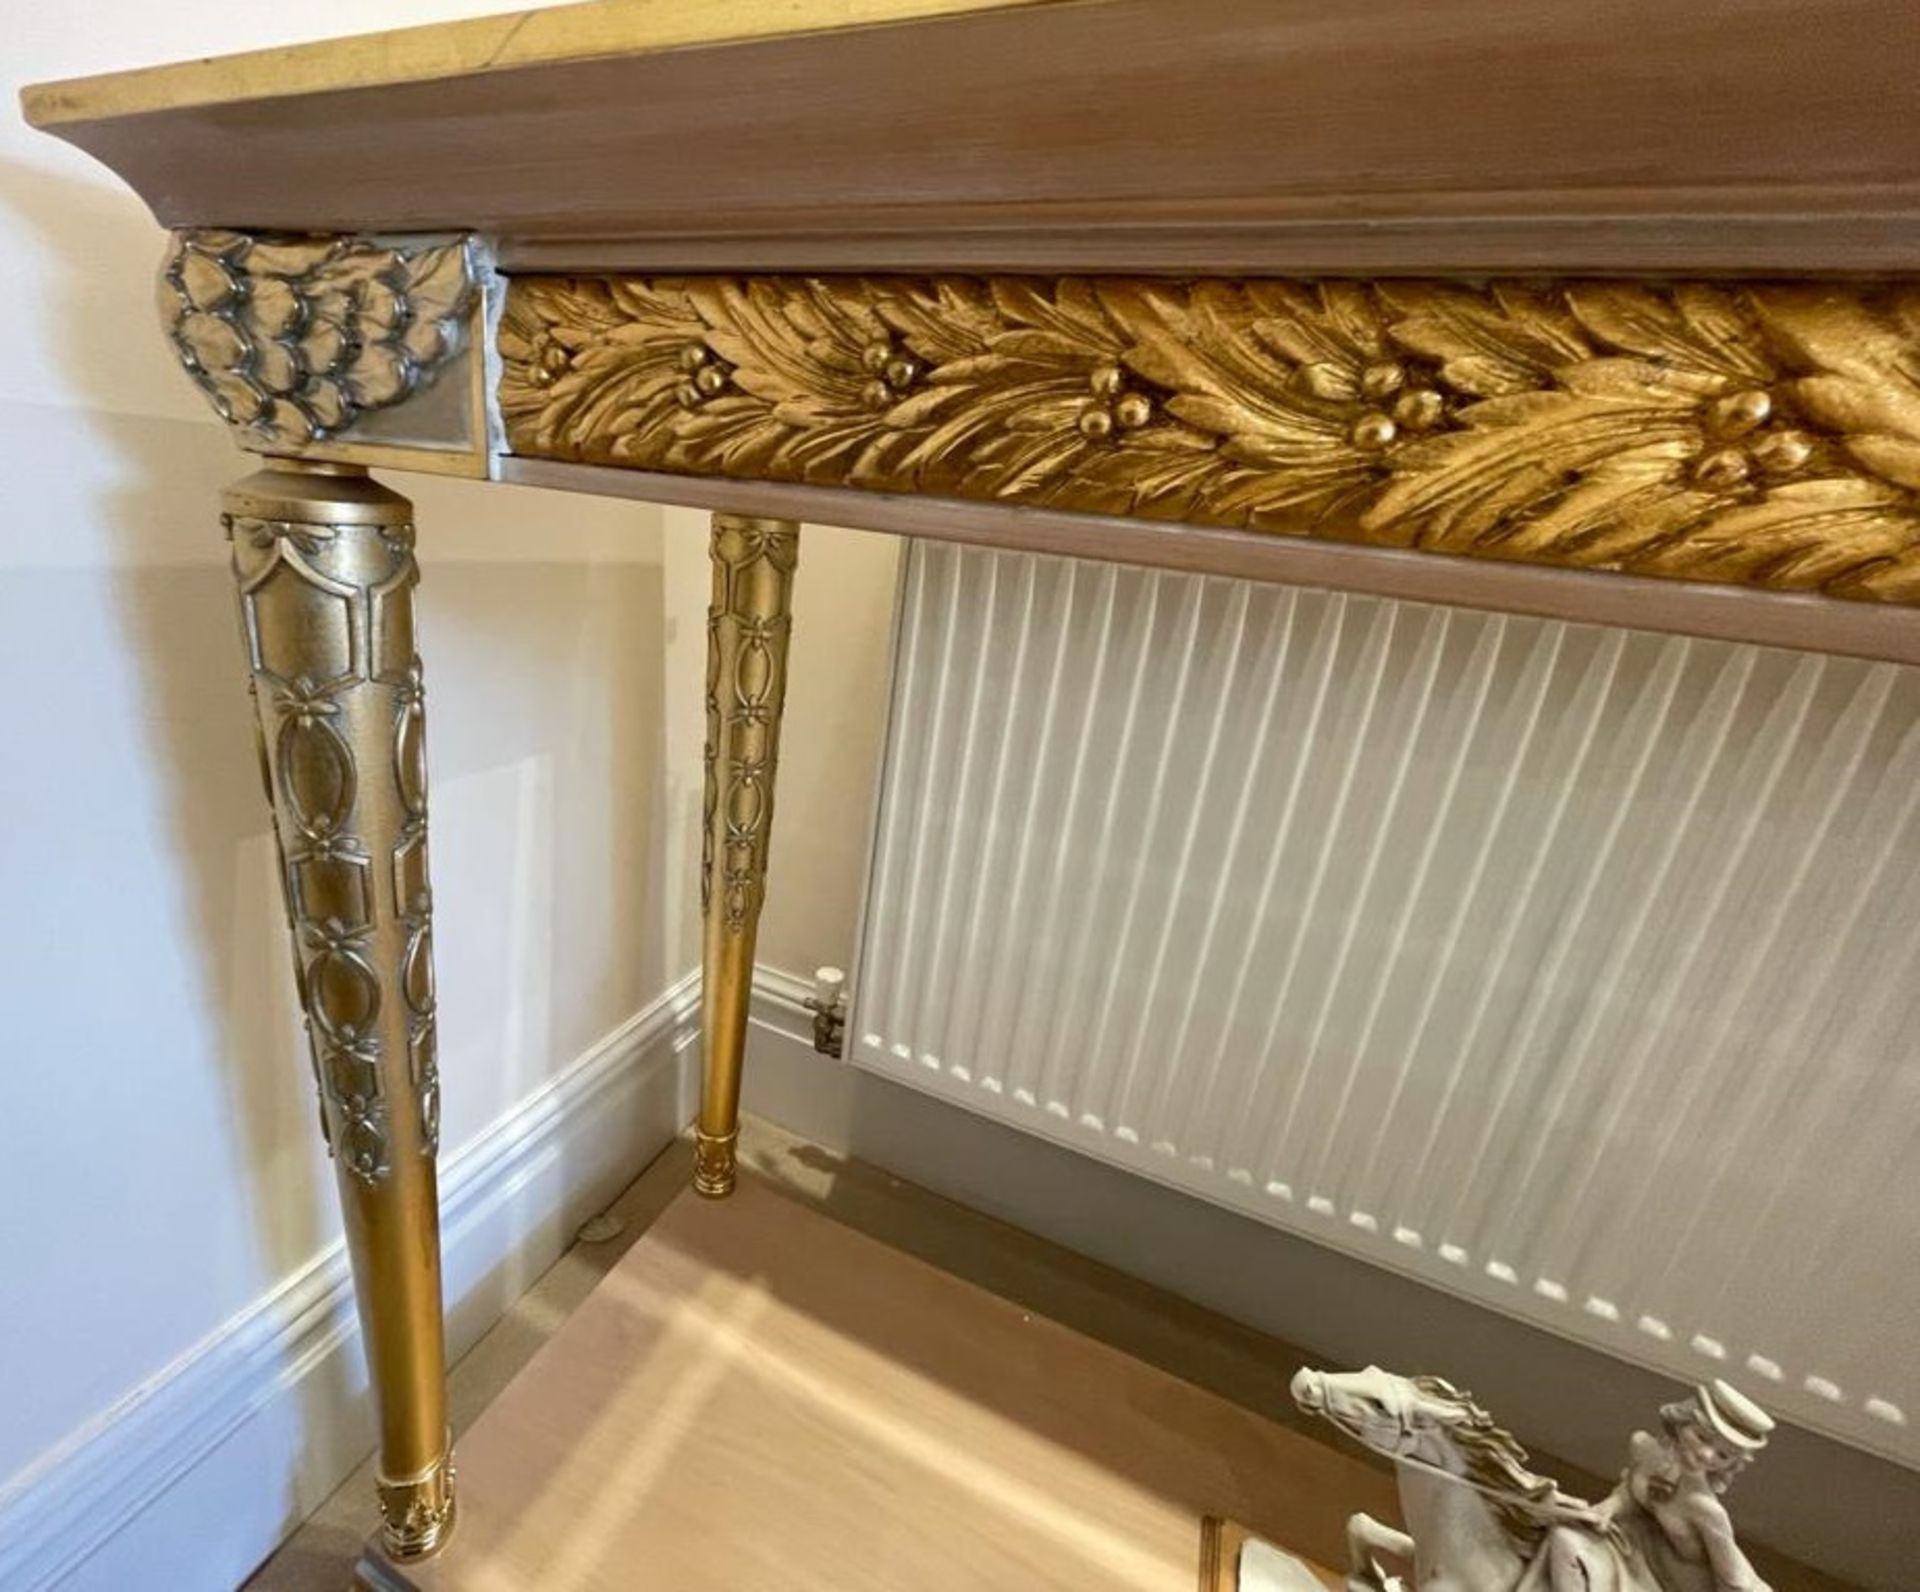 1 x Hand Carved Ornate Console Table Complimented With Birchwood Veneer, Golden Pillar Legs, - Image 2 of 10